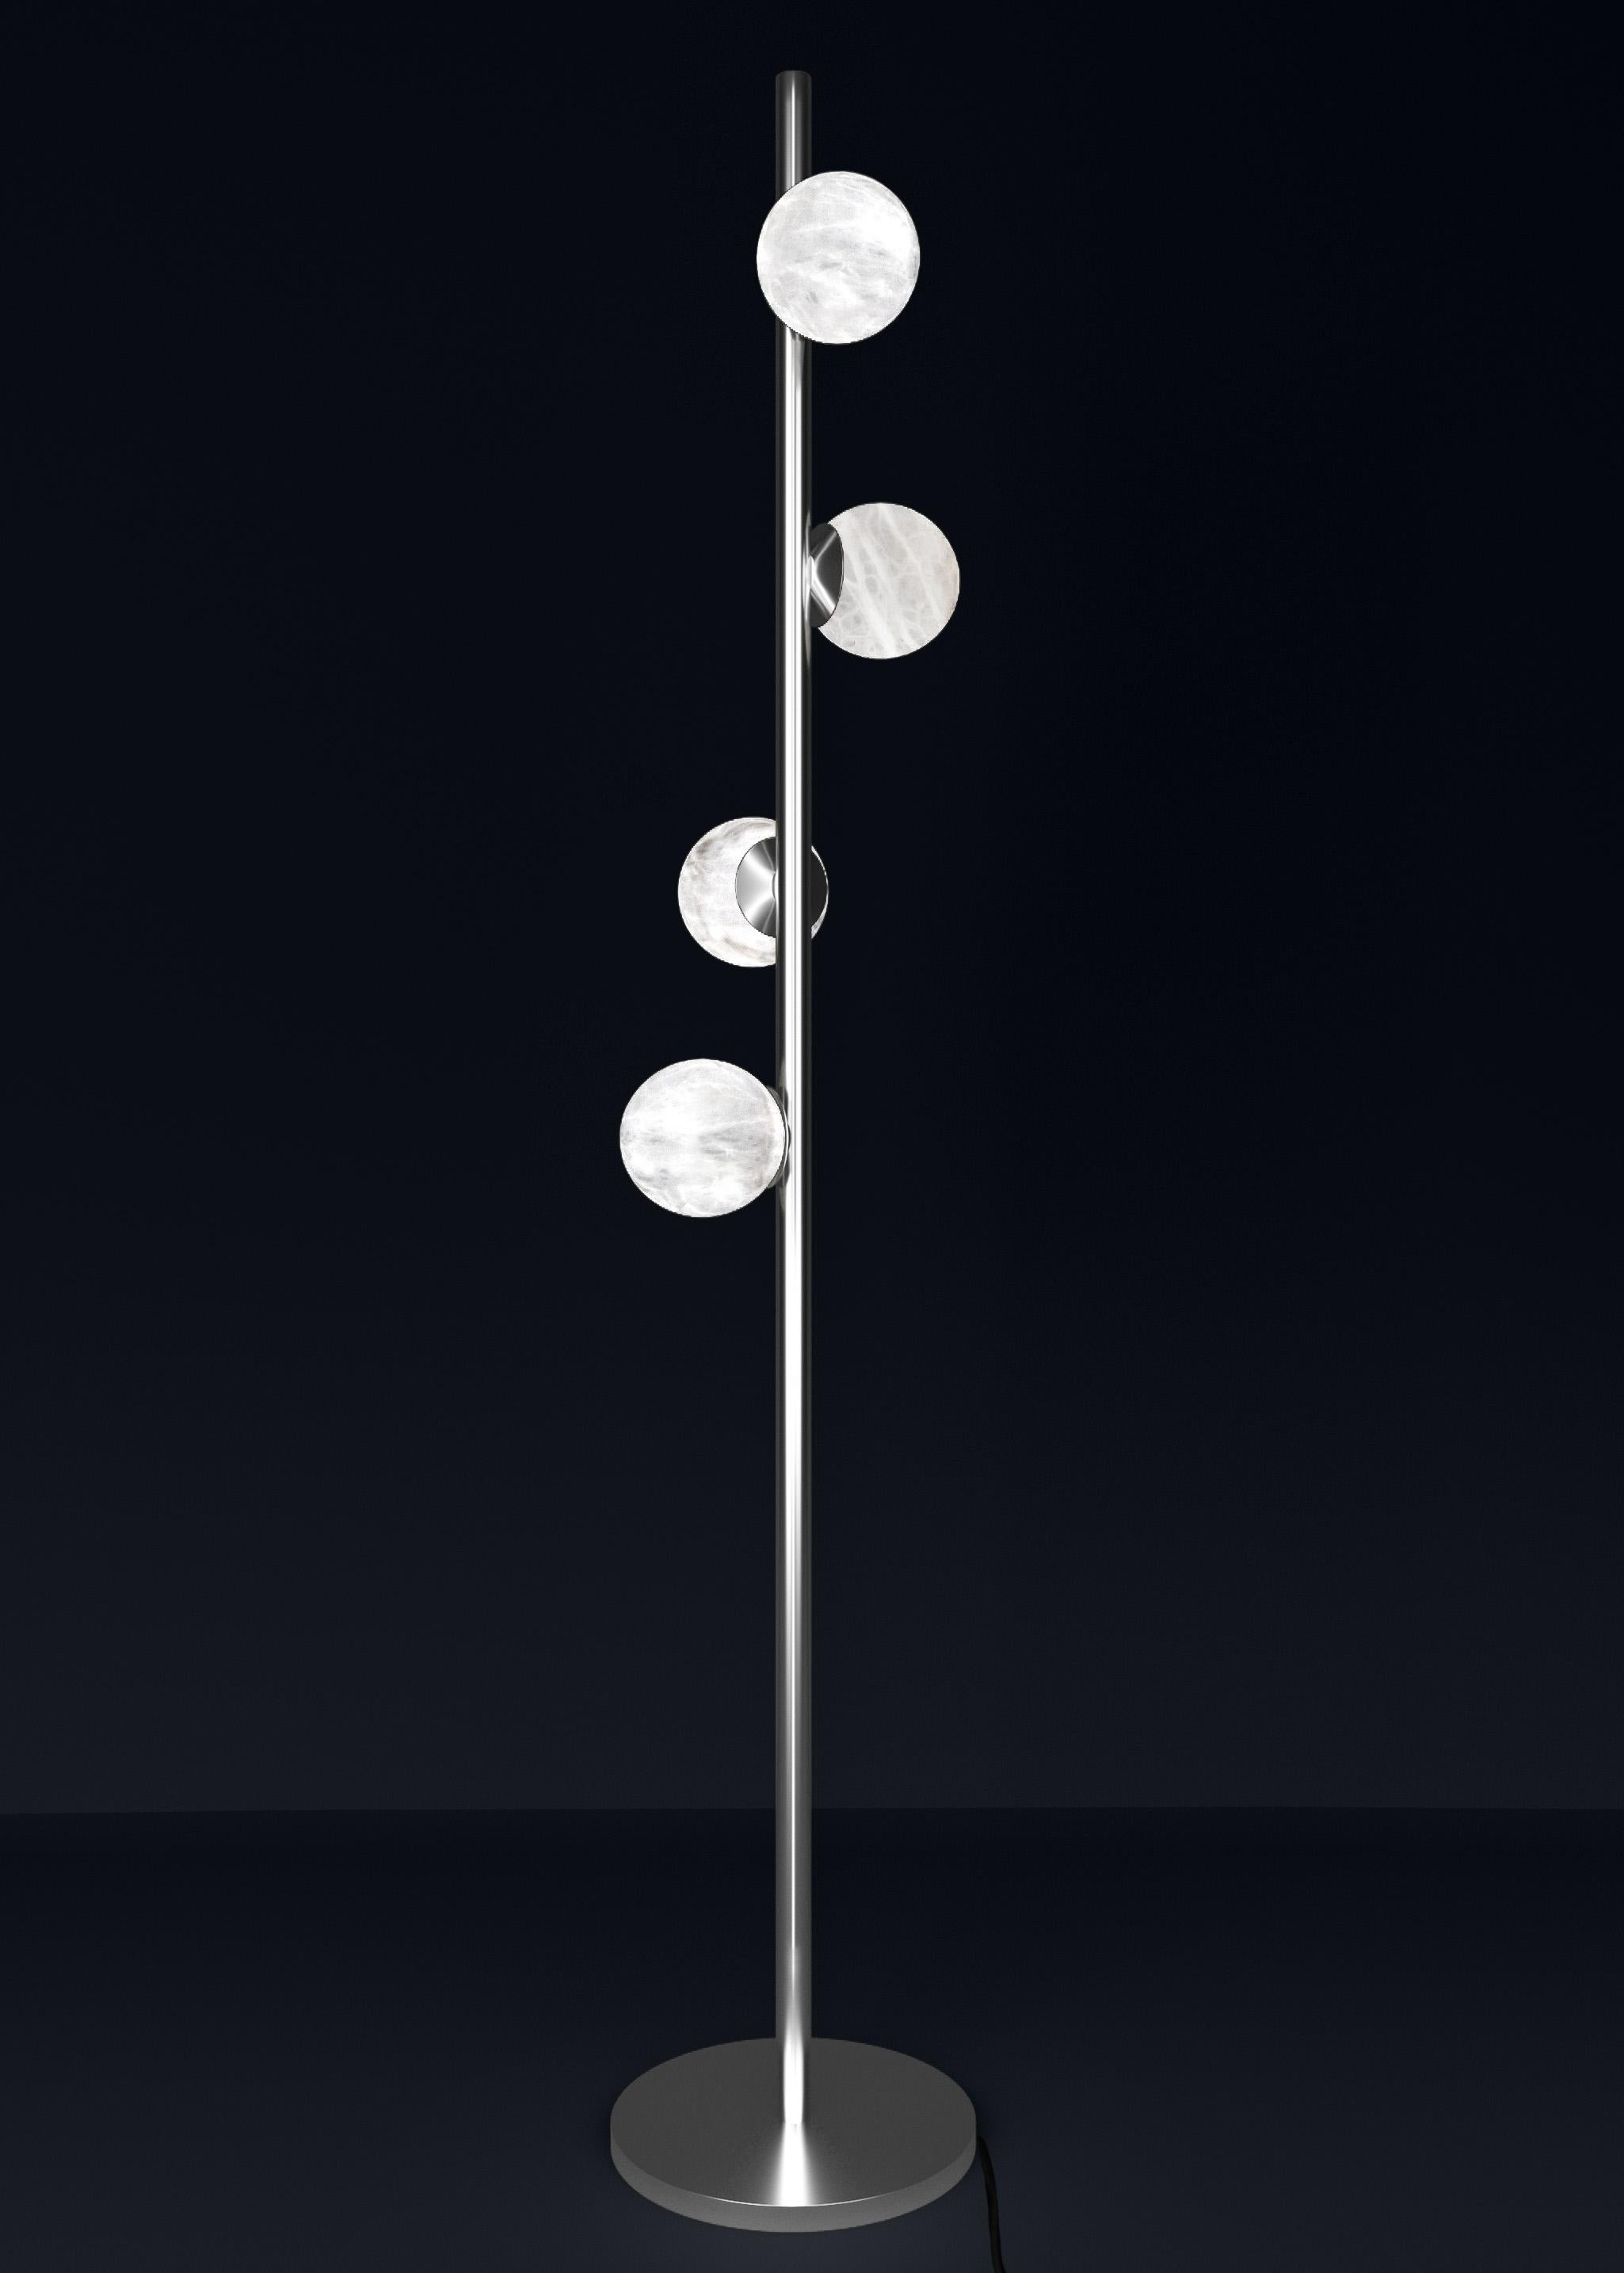 Ofione Shiny Silver Metal Floor Lamp by Alabastro Italiano
Dimensions: D 50 x W 50 x H 170 cm.
Materials: White alabaster and metal.

Available in different finishes: Shiny Silver, Bronze, Brushed Brass, Matte Black, Ruggine of Florence, Brushed